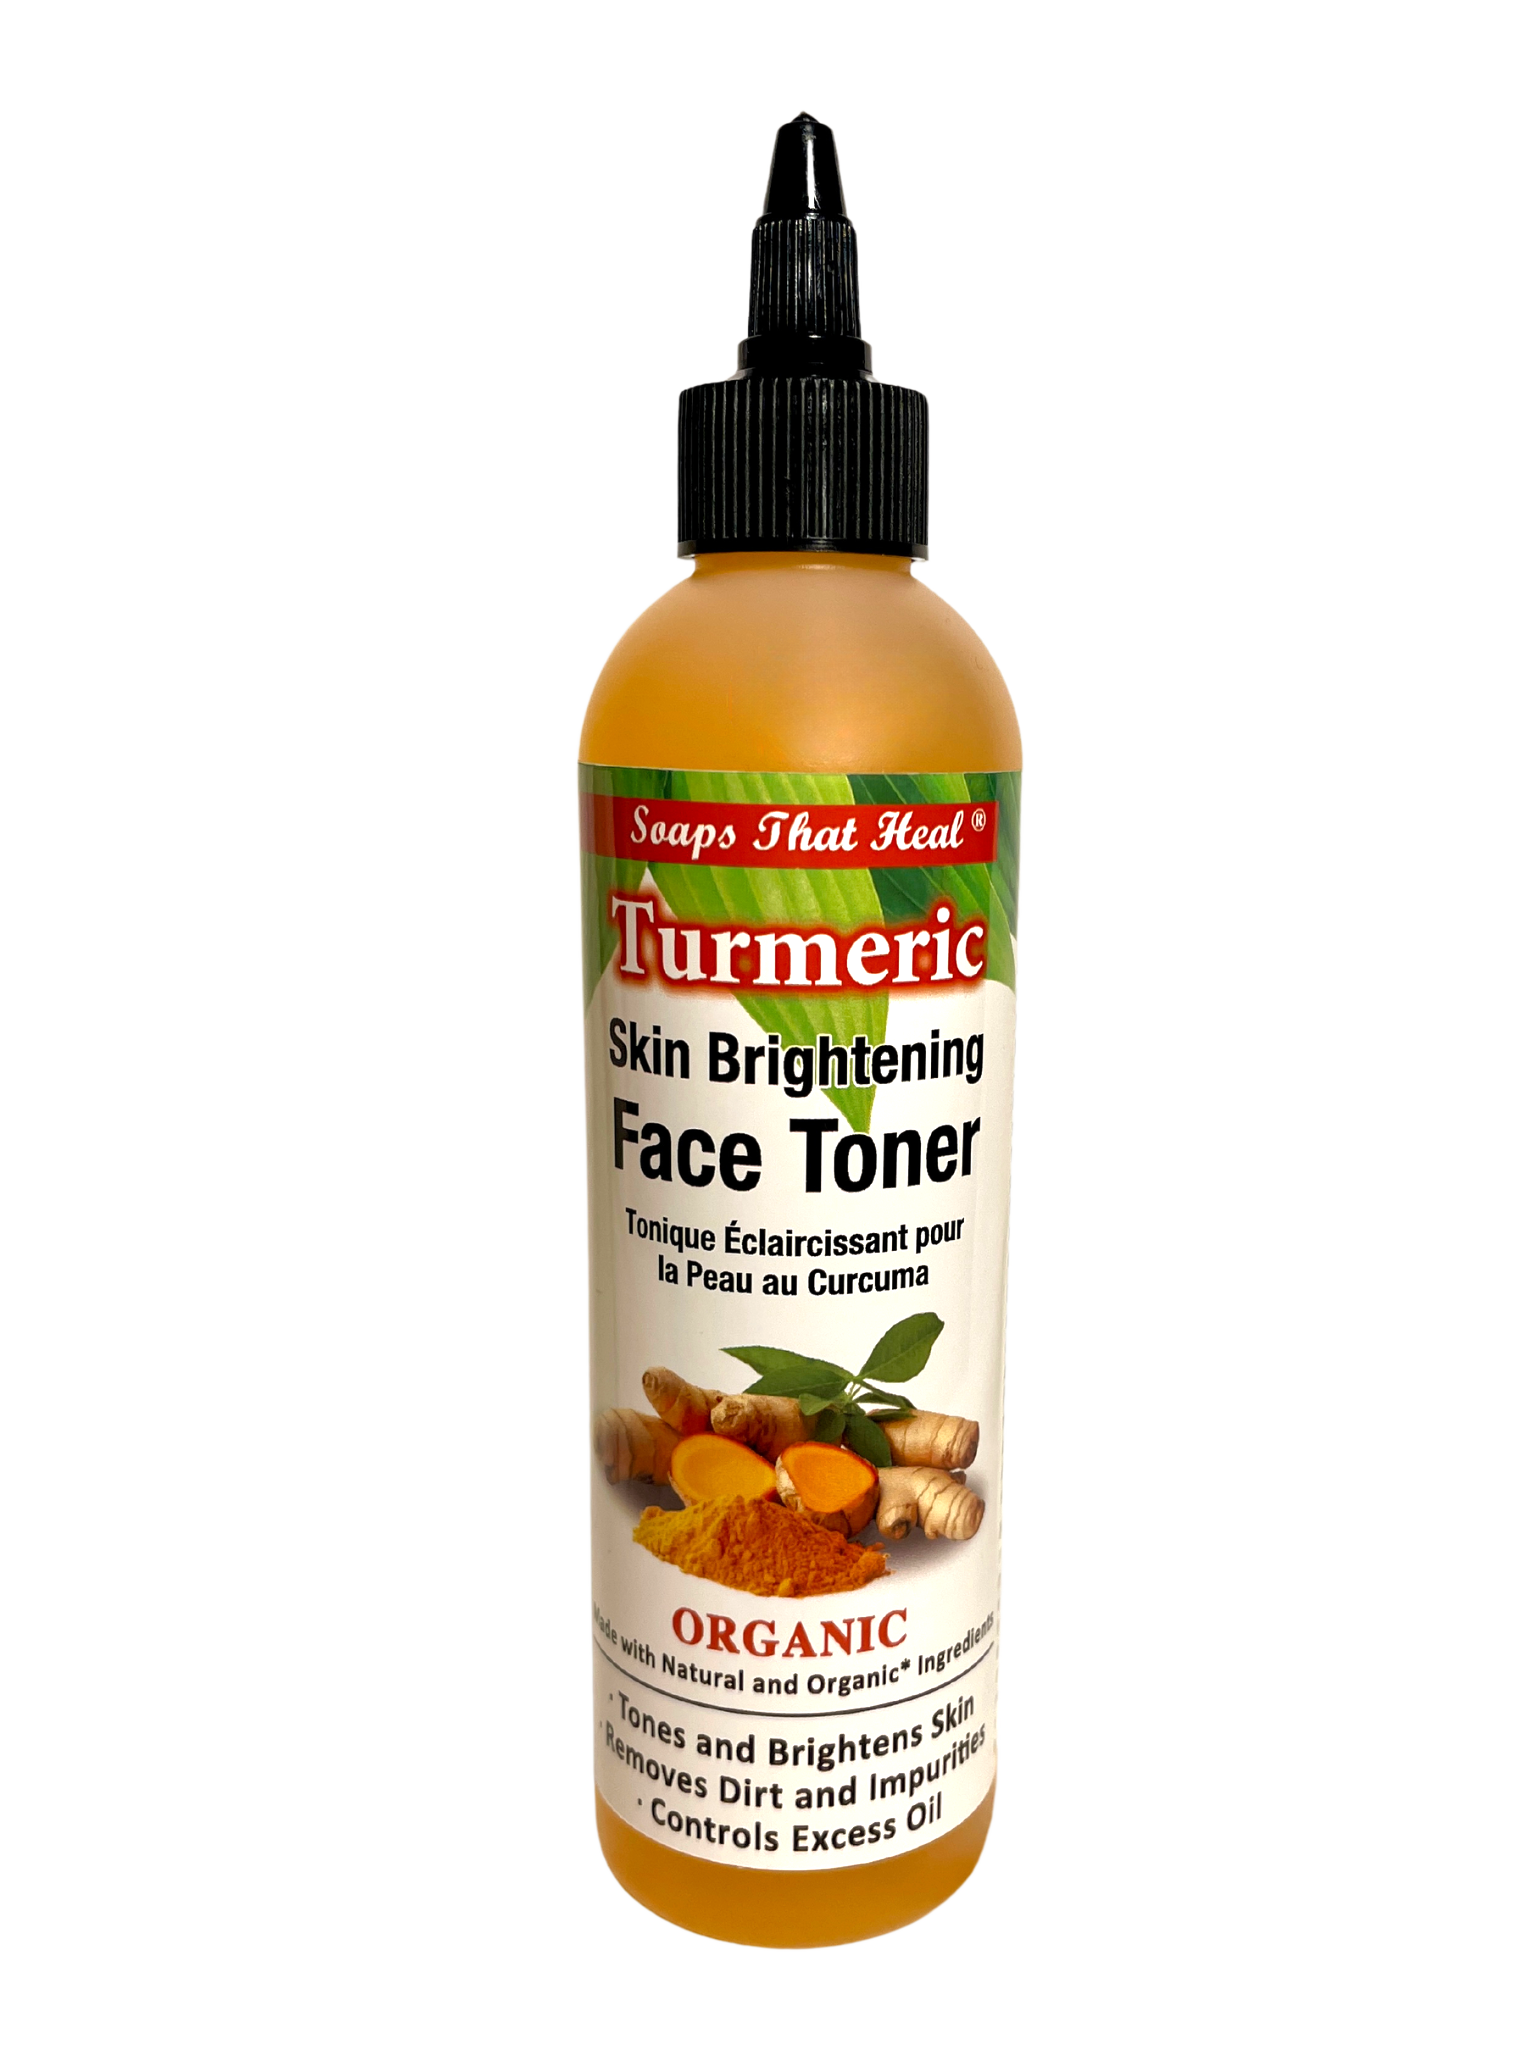 turmeric skin brightening face toner, soaps that heal turmeric soap, natural lightening, natural alternatives to whitening creams,fade creams,bleaching creams,Remove Dark Spots and Acne,aspen kay,Healthy Skin, Natural Products Skin Care, problem skin,Turmeric Soap,the best body soap,saje,soaps that heal,healing soap, how to get rid of dark marks,dark spots,whitening soaps,lightening soaps,hyperpigmentation, best turmeric soap,oilblends,uncle benney's,soaps that heal